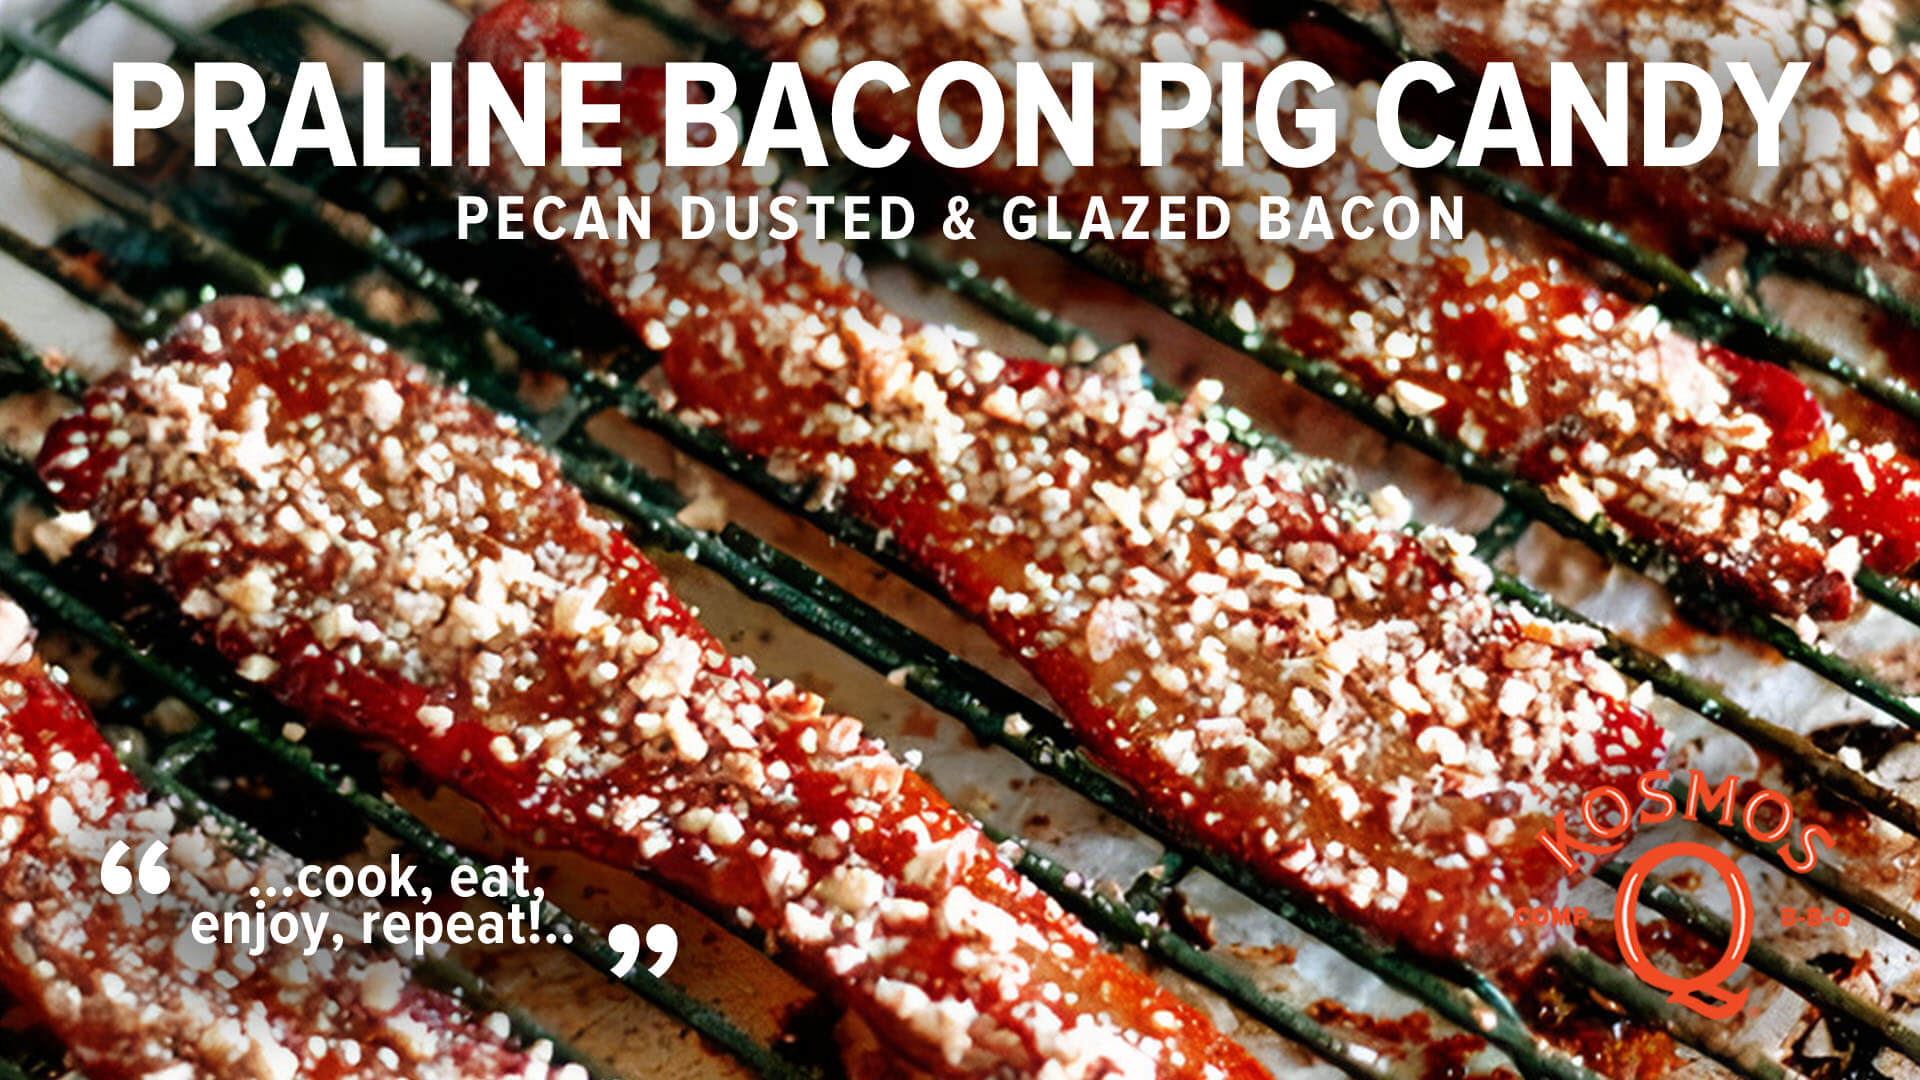 Praline Bacon Pig Candy